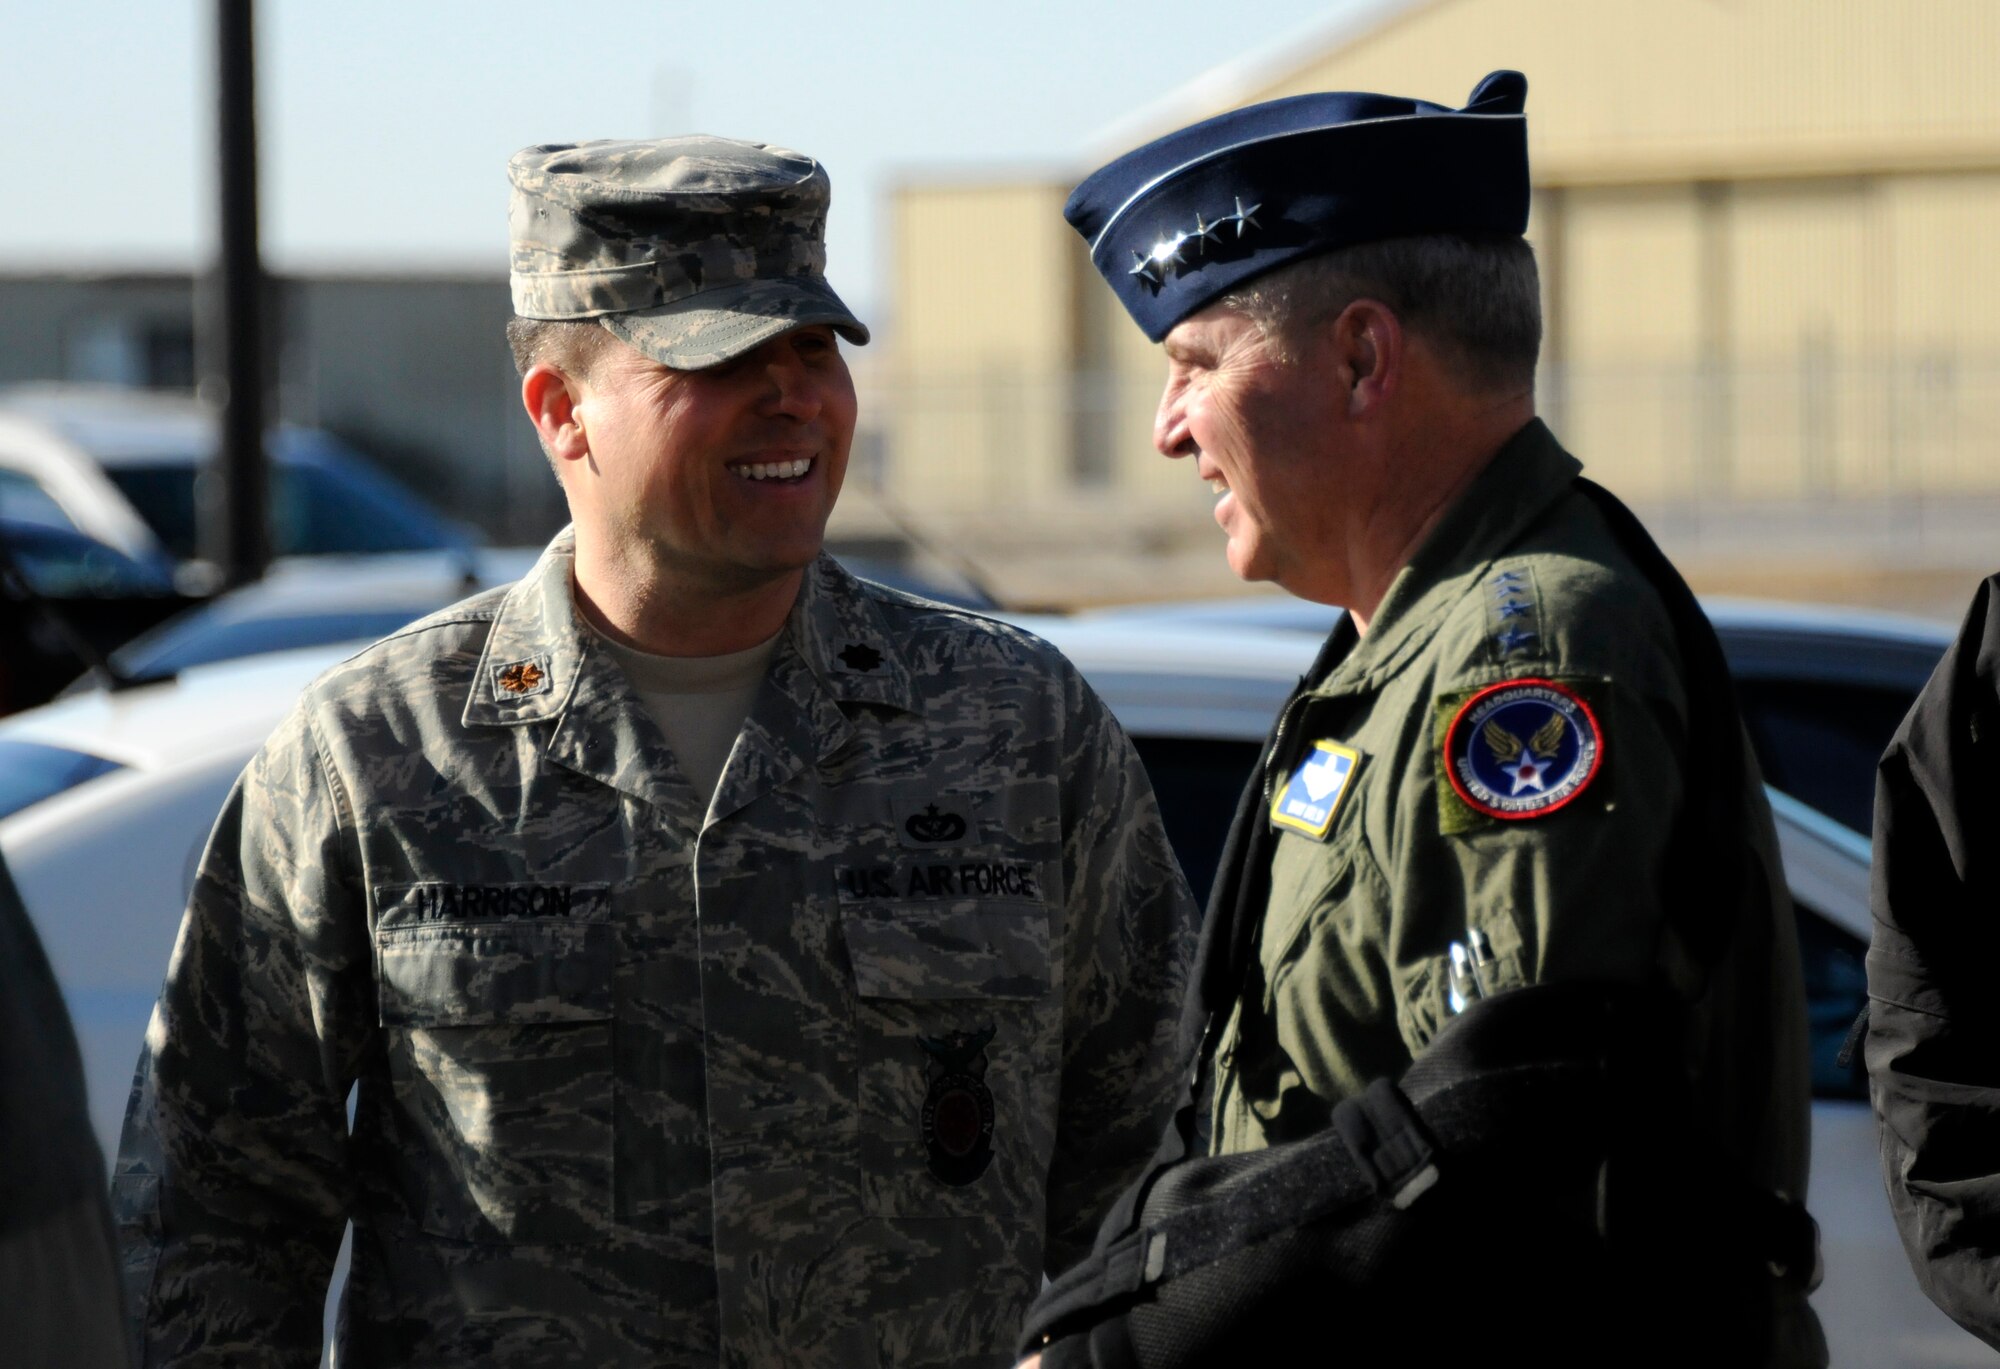 Air Force Chief of Staff Gen. Mark A. Welsh III, right, talks with Maj. Joe Harrison, 188th Civil Engineer Squadron commander, at the 188th Fighter Wing in Fort Smith, Ark., Jan. 18, 2013. Welsh toured the unit’s facilities and learned about the wing’s mission. (National Guard photo by Senior Airman John Hillier/188th Fighter Wing Public Affairs)